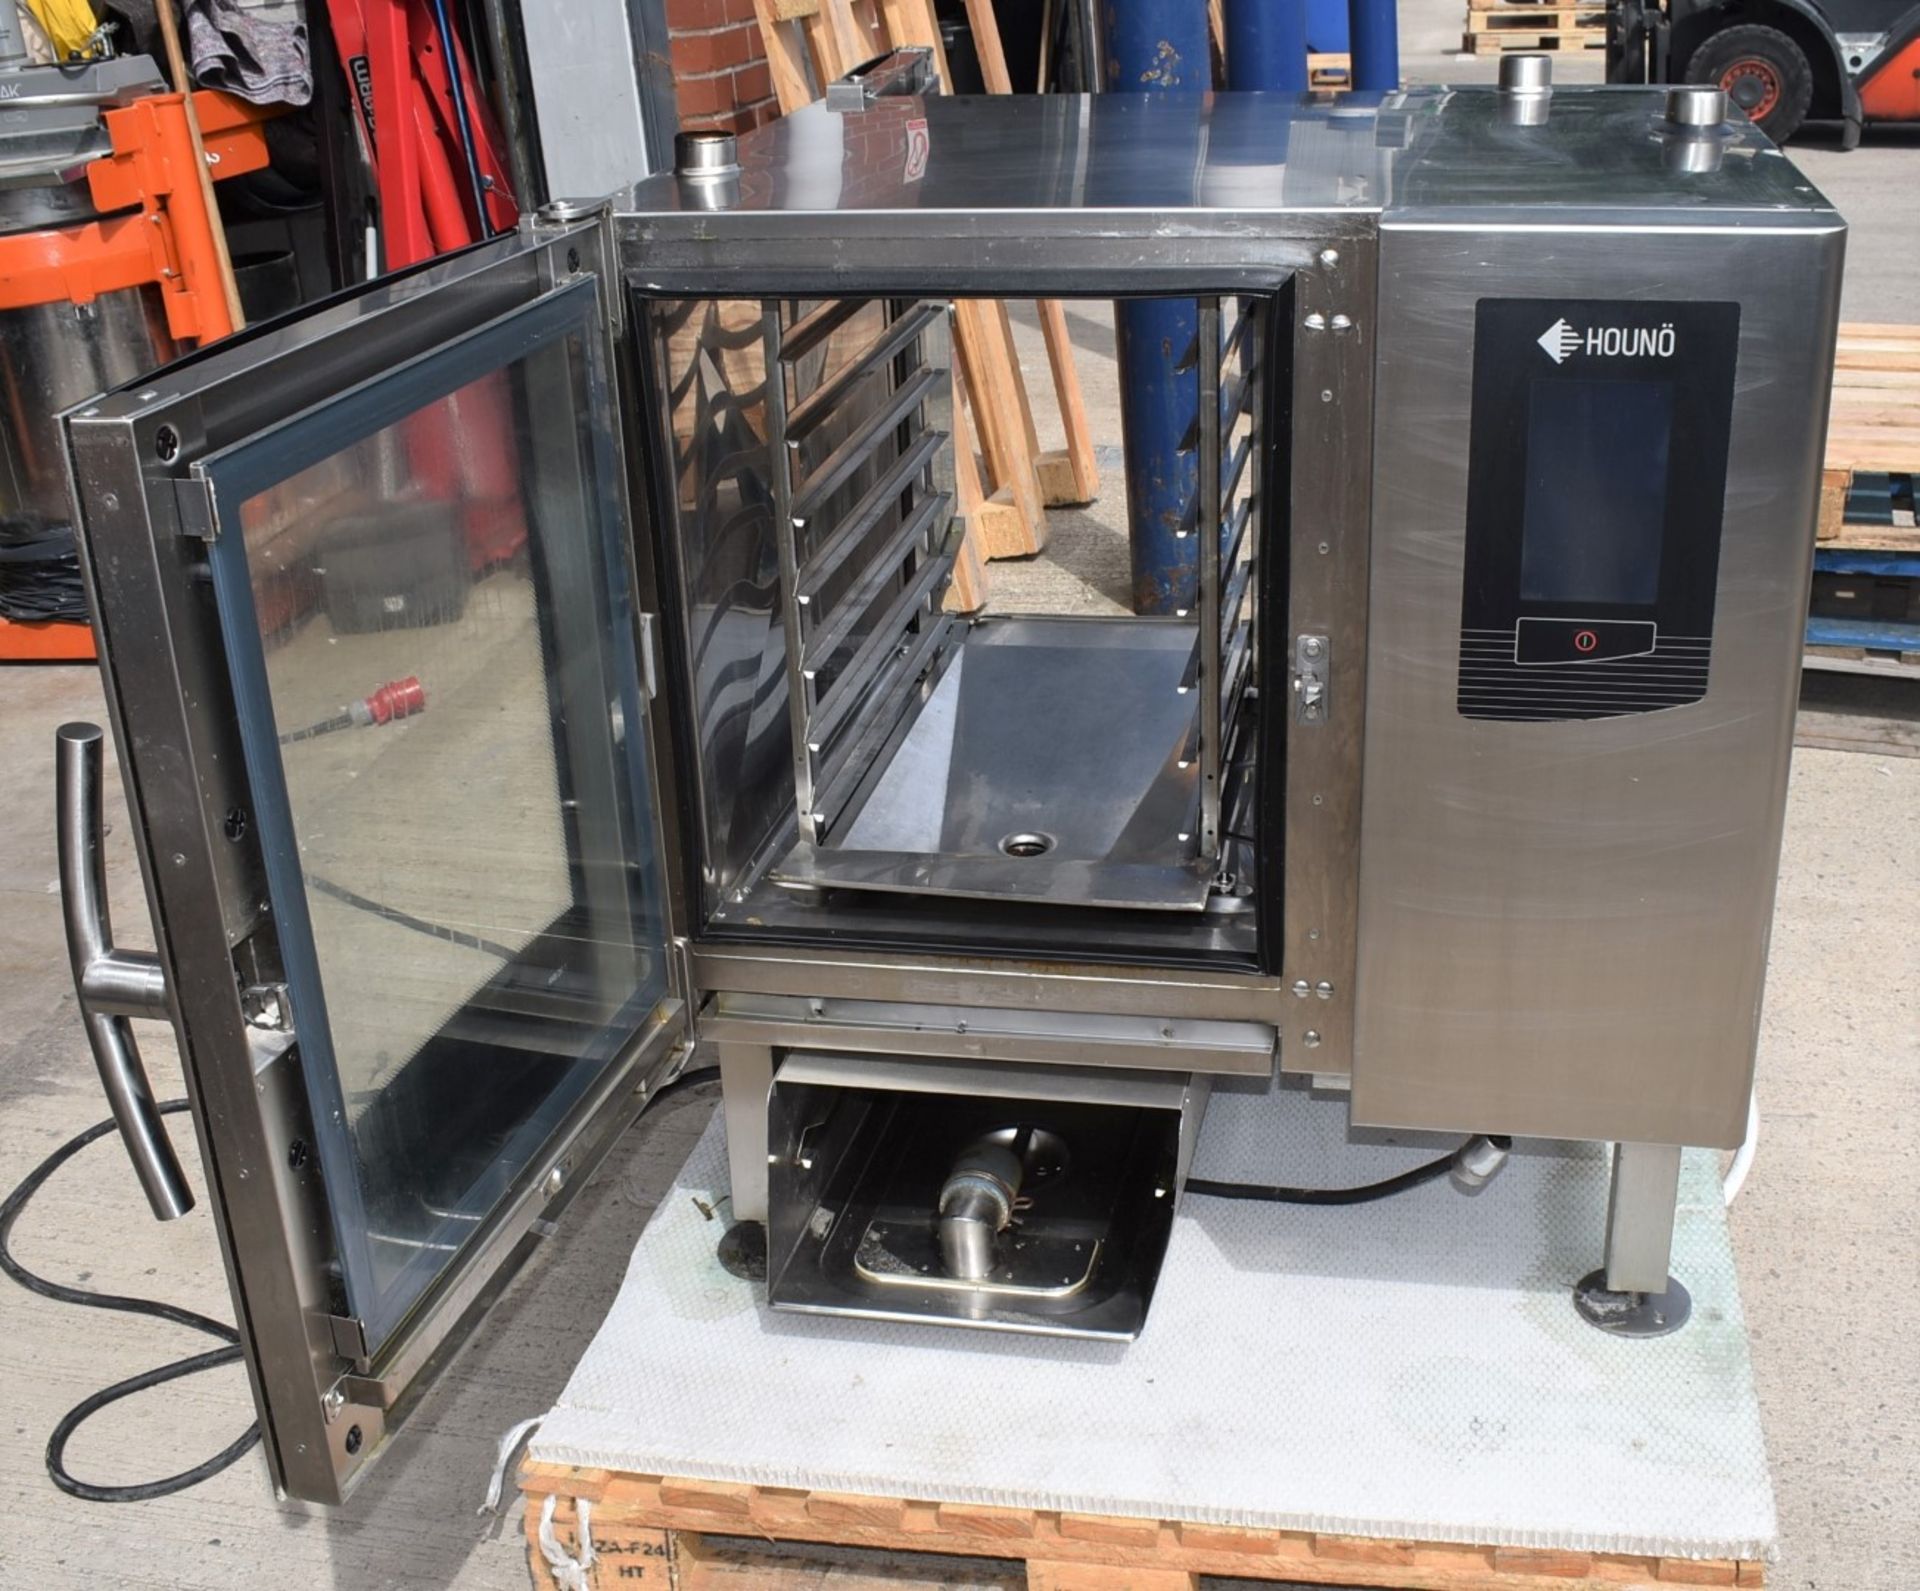 1 x Houno 6 Grid Electric Passthrough Door Combi Oven - 3 Phase With Pre-Set Cooking Options - Image 11 of 17